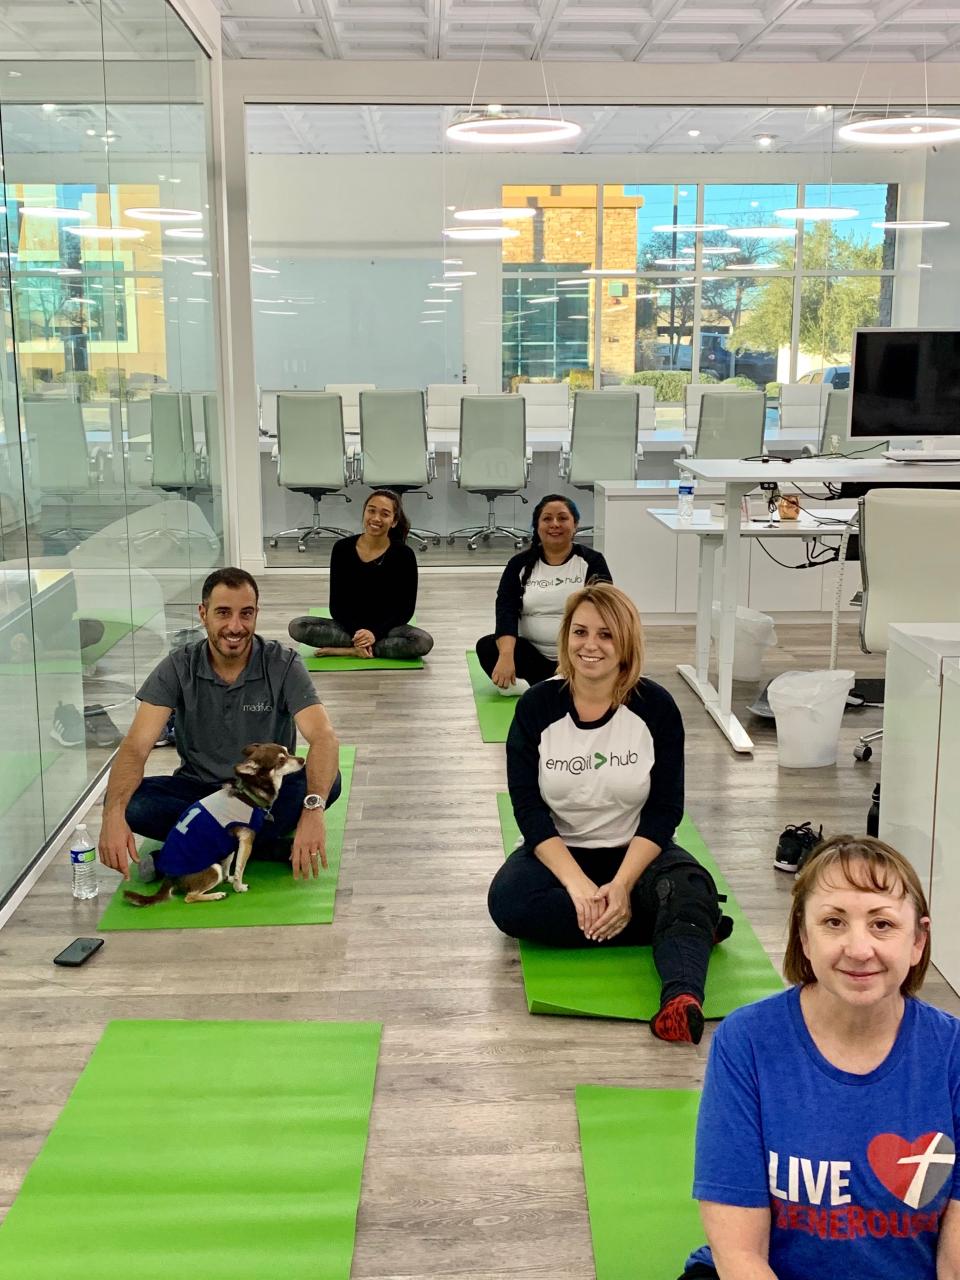 Thursday afternoon culture event - yoga